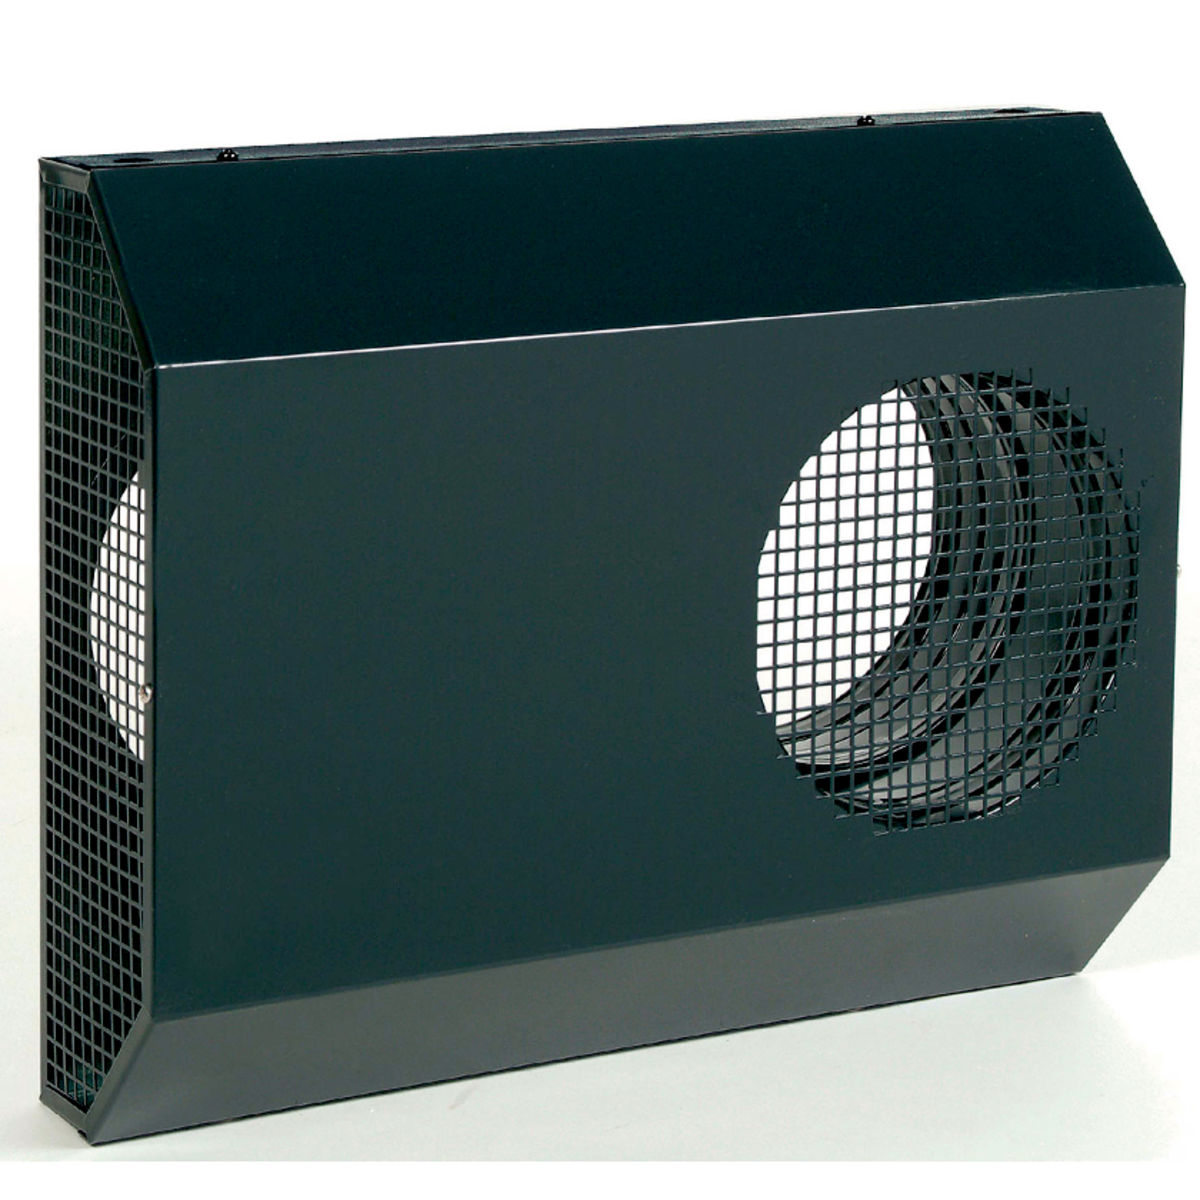 CVVX - Grilles - Residential Ventilation Systems - Products - Systemair